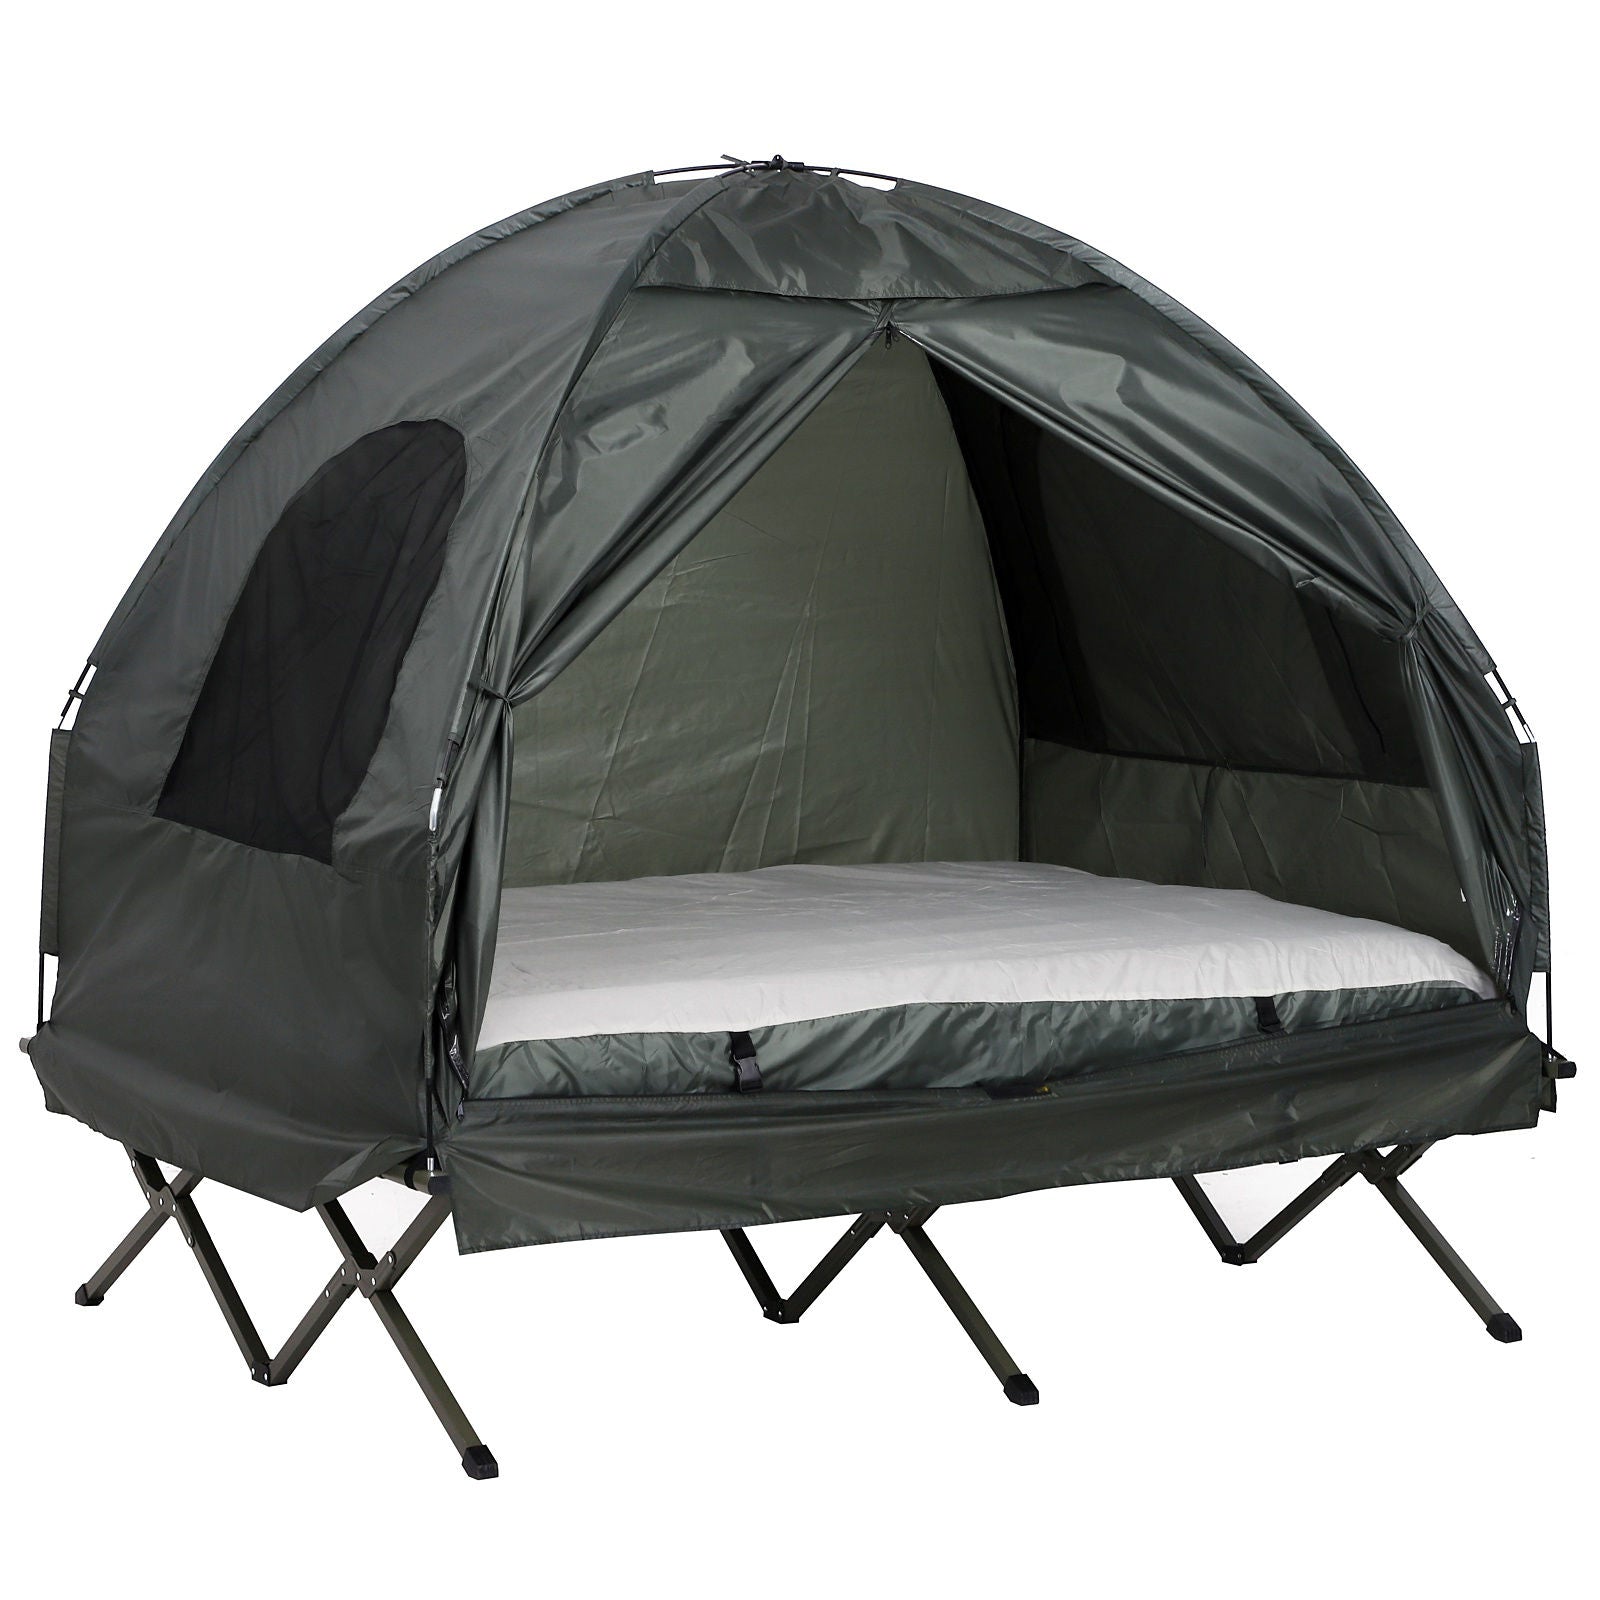 Nancy's Pacbitun Camping Tent - Camping tent - With 2 Person Mattress Green - ± 195 x 145 x 180 cm